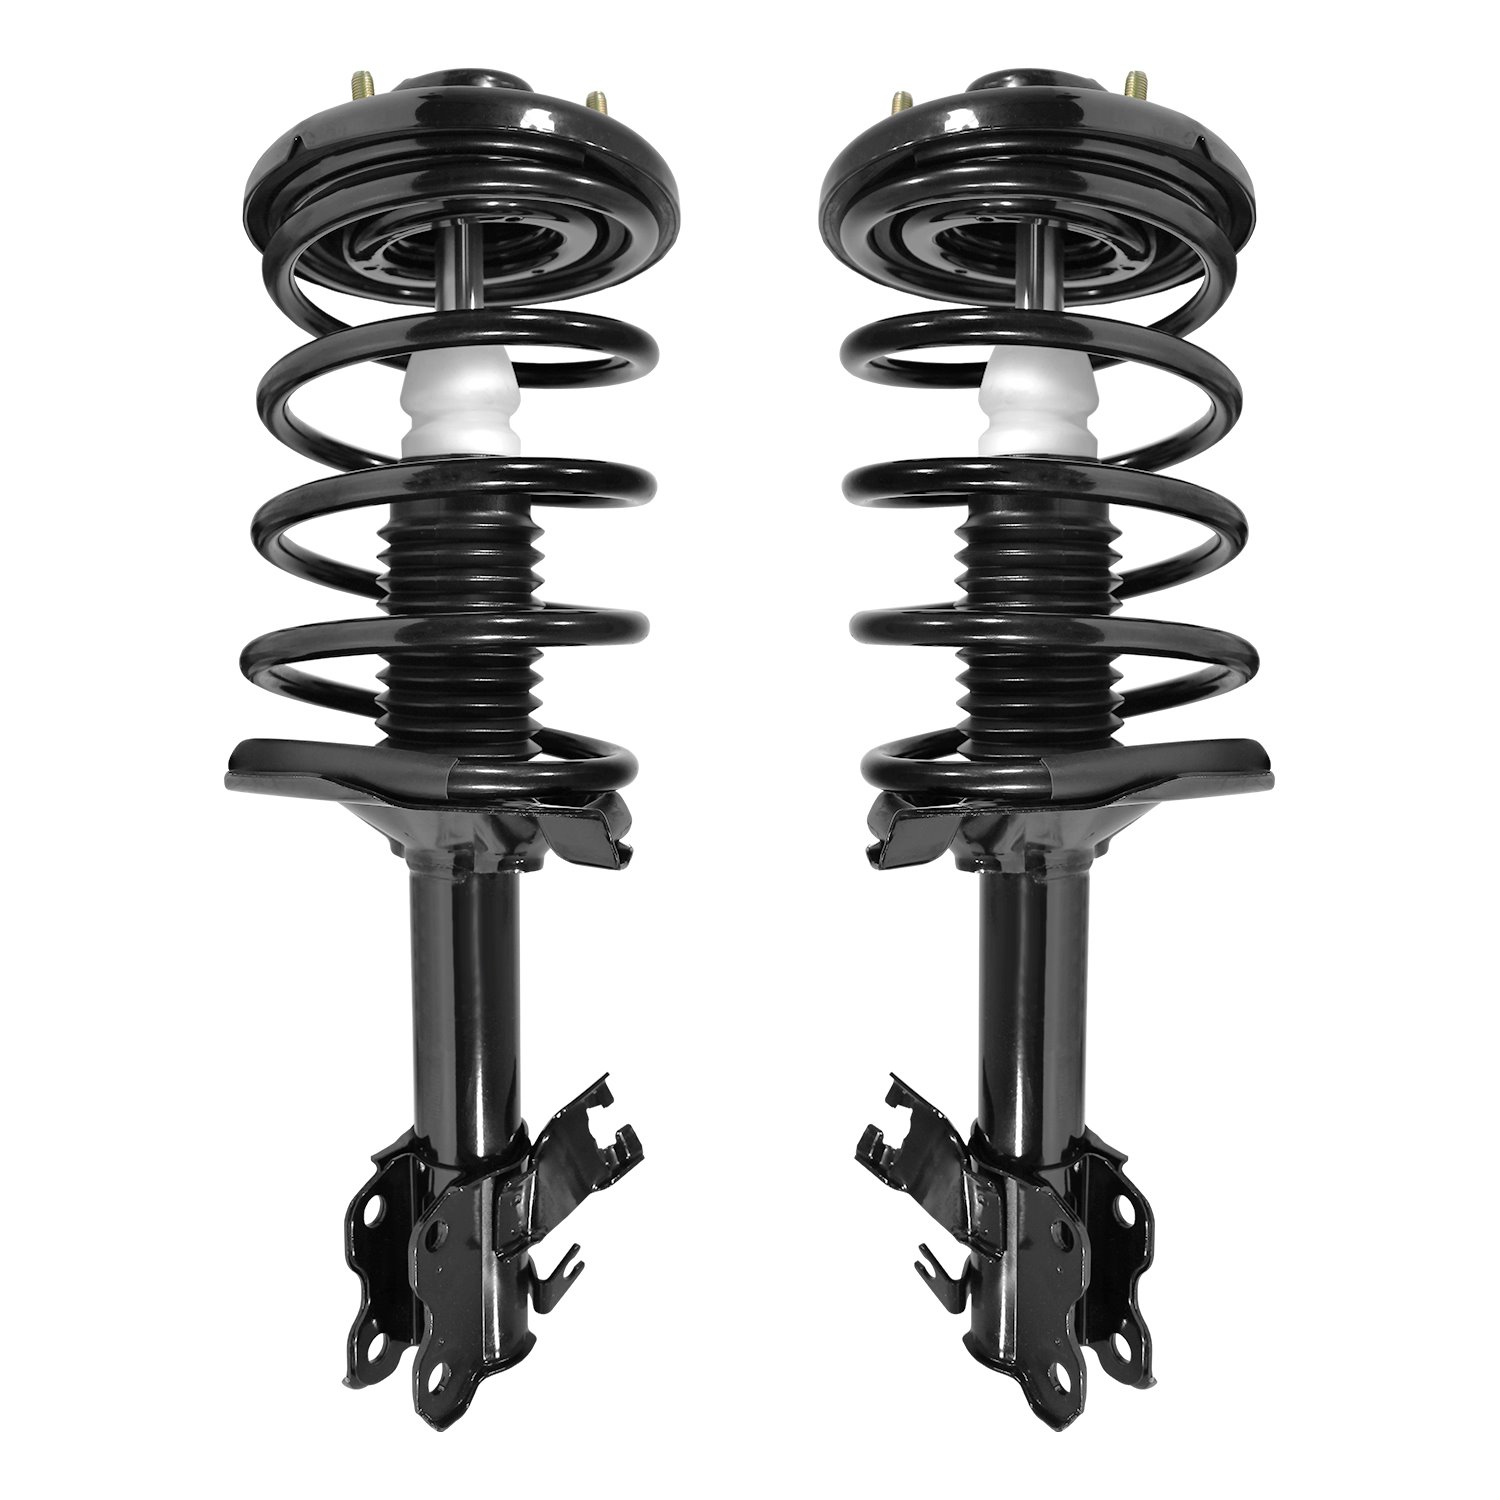 2-11943-11944-001 Suspension Strut & Coil Spring Assembly Set Fits Select Nissan Maxima, Infiniti I35